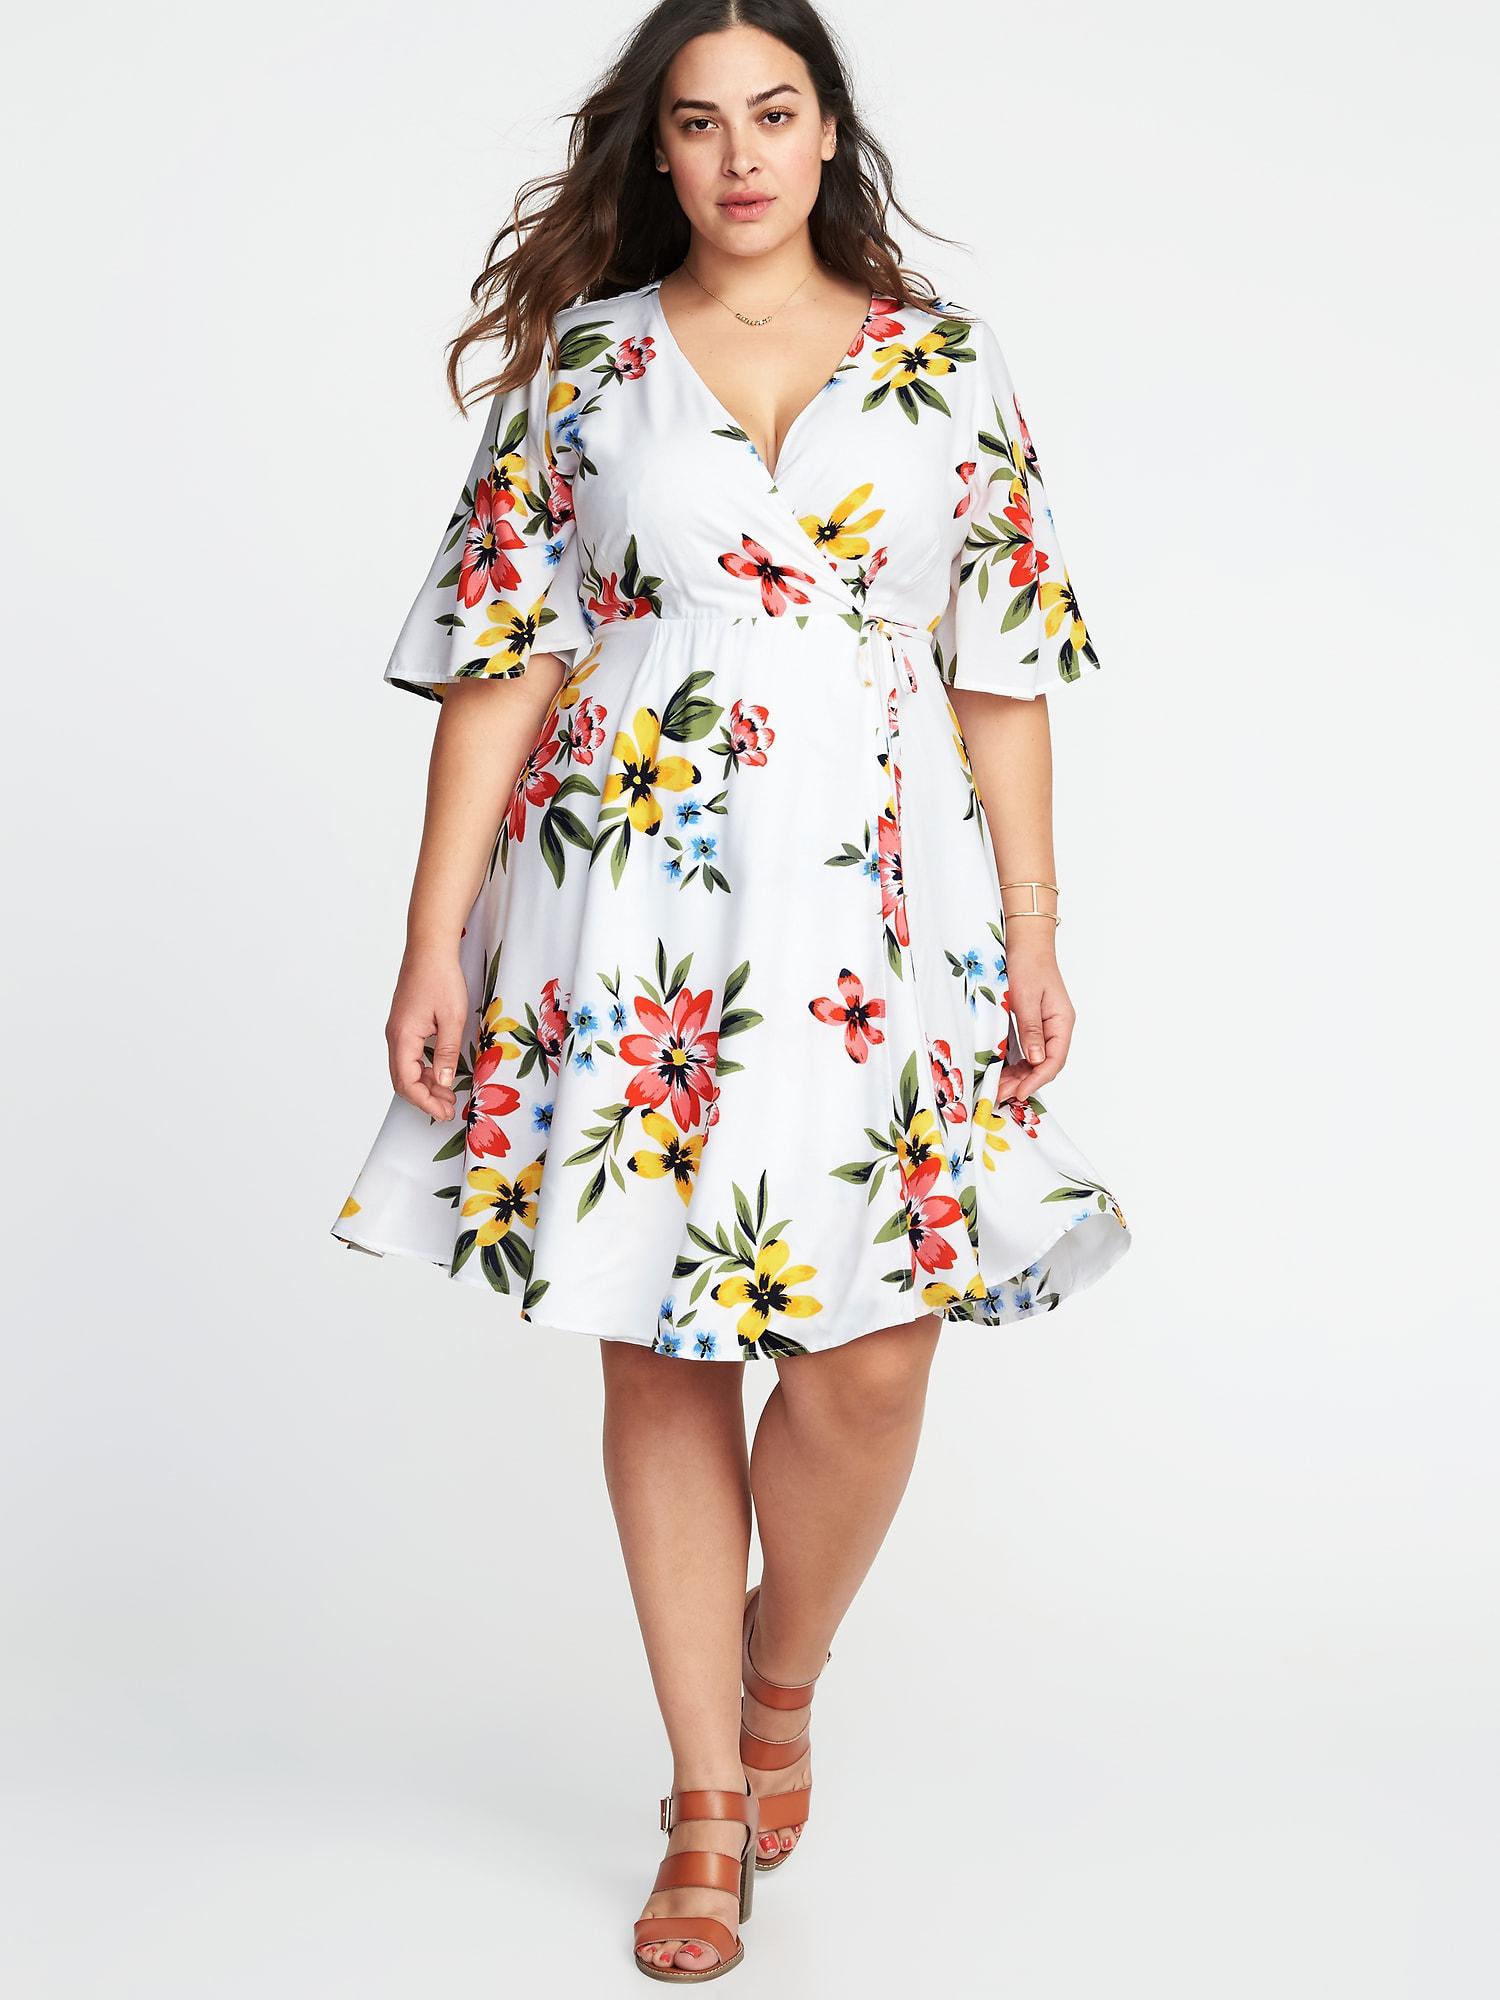 old navy white dress with flowers